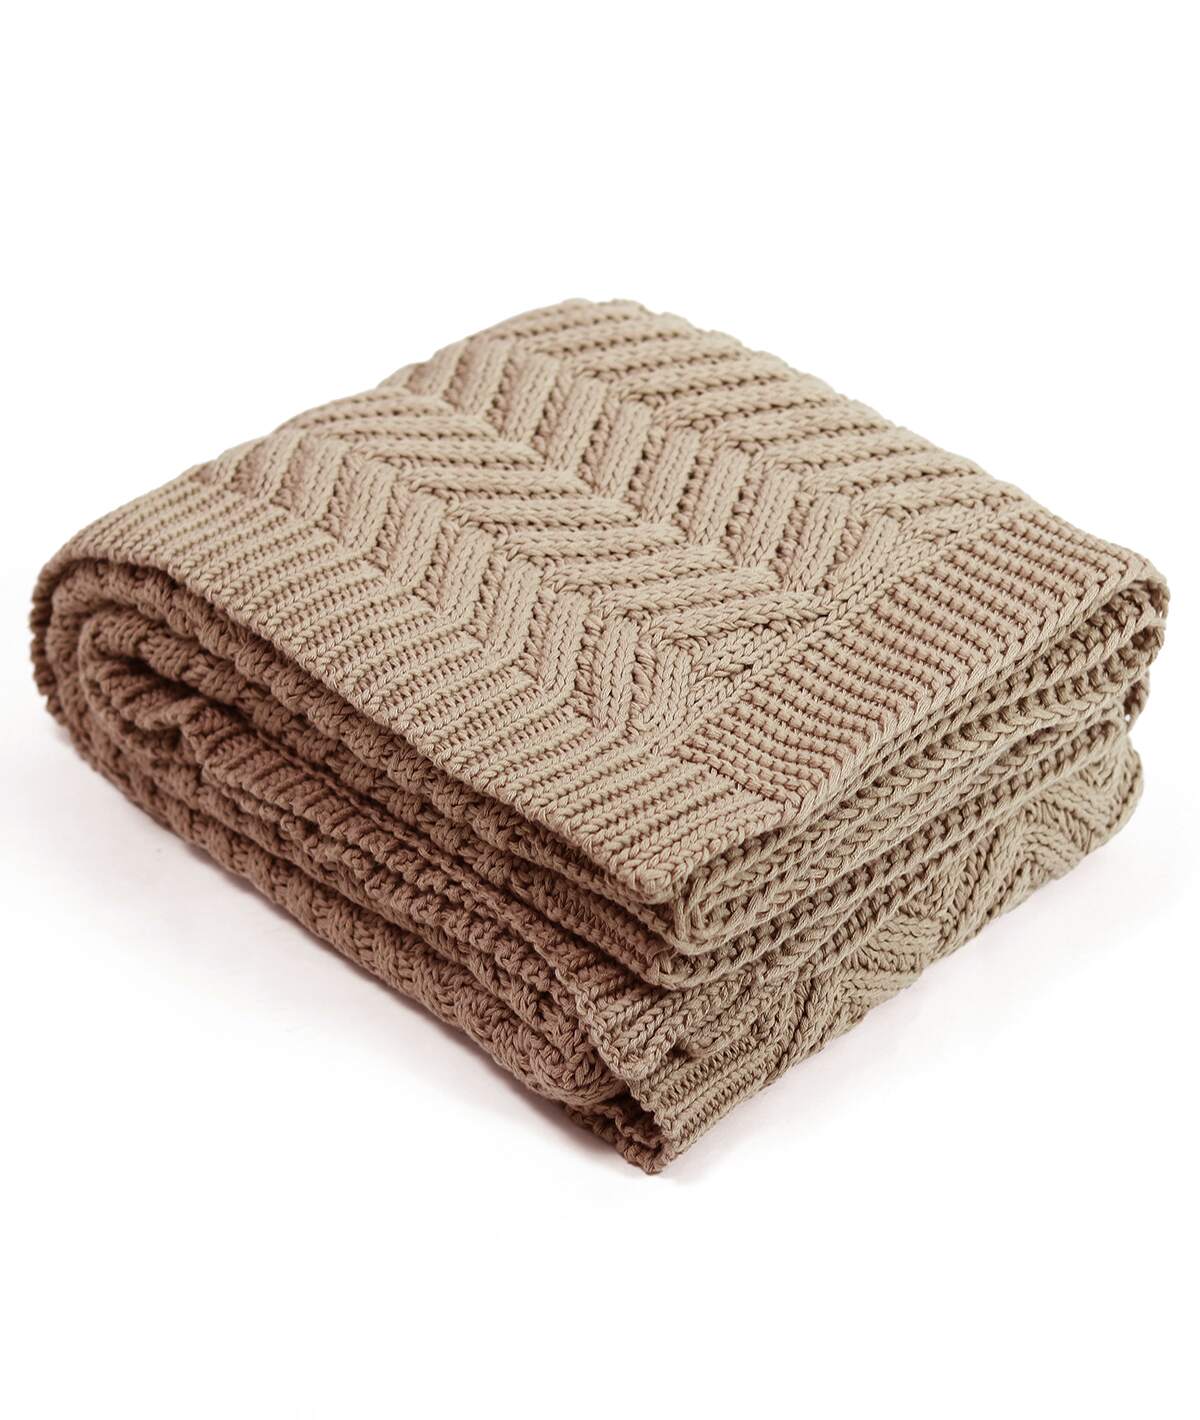 Chevron Oatmeal Color Cotton Knitted Throw /Blanket  For Round The Year Use